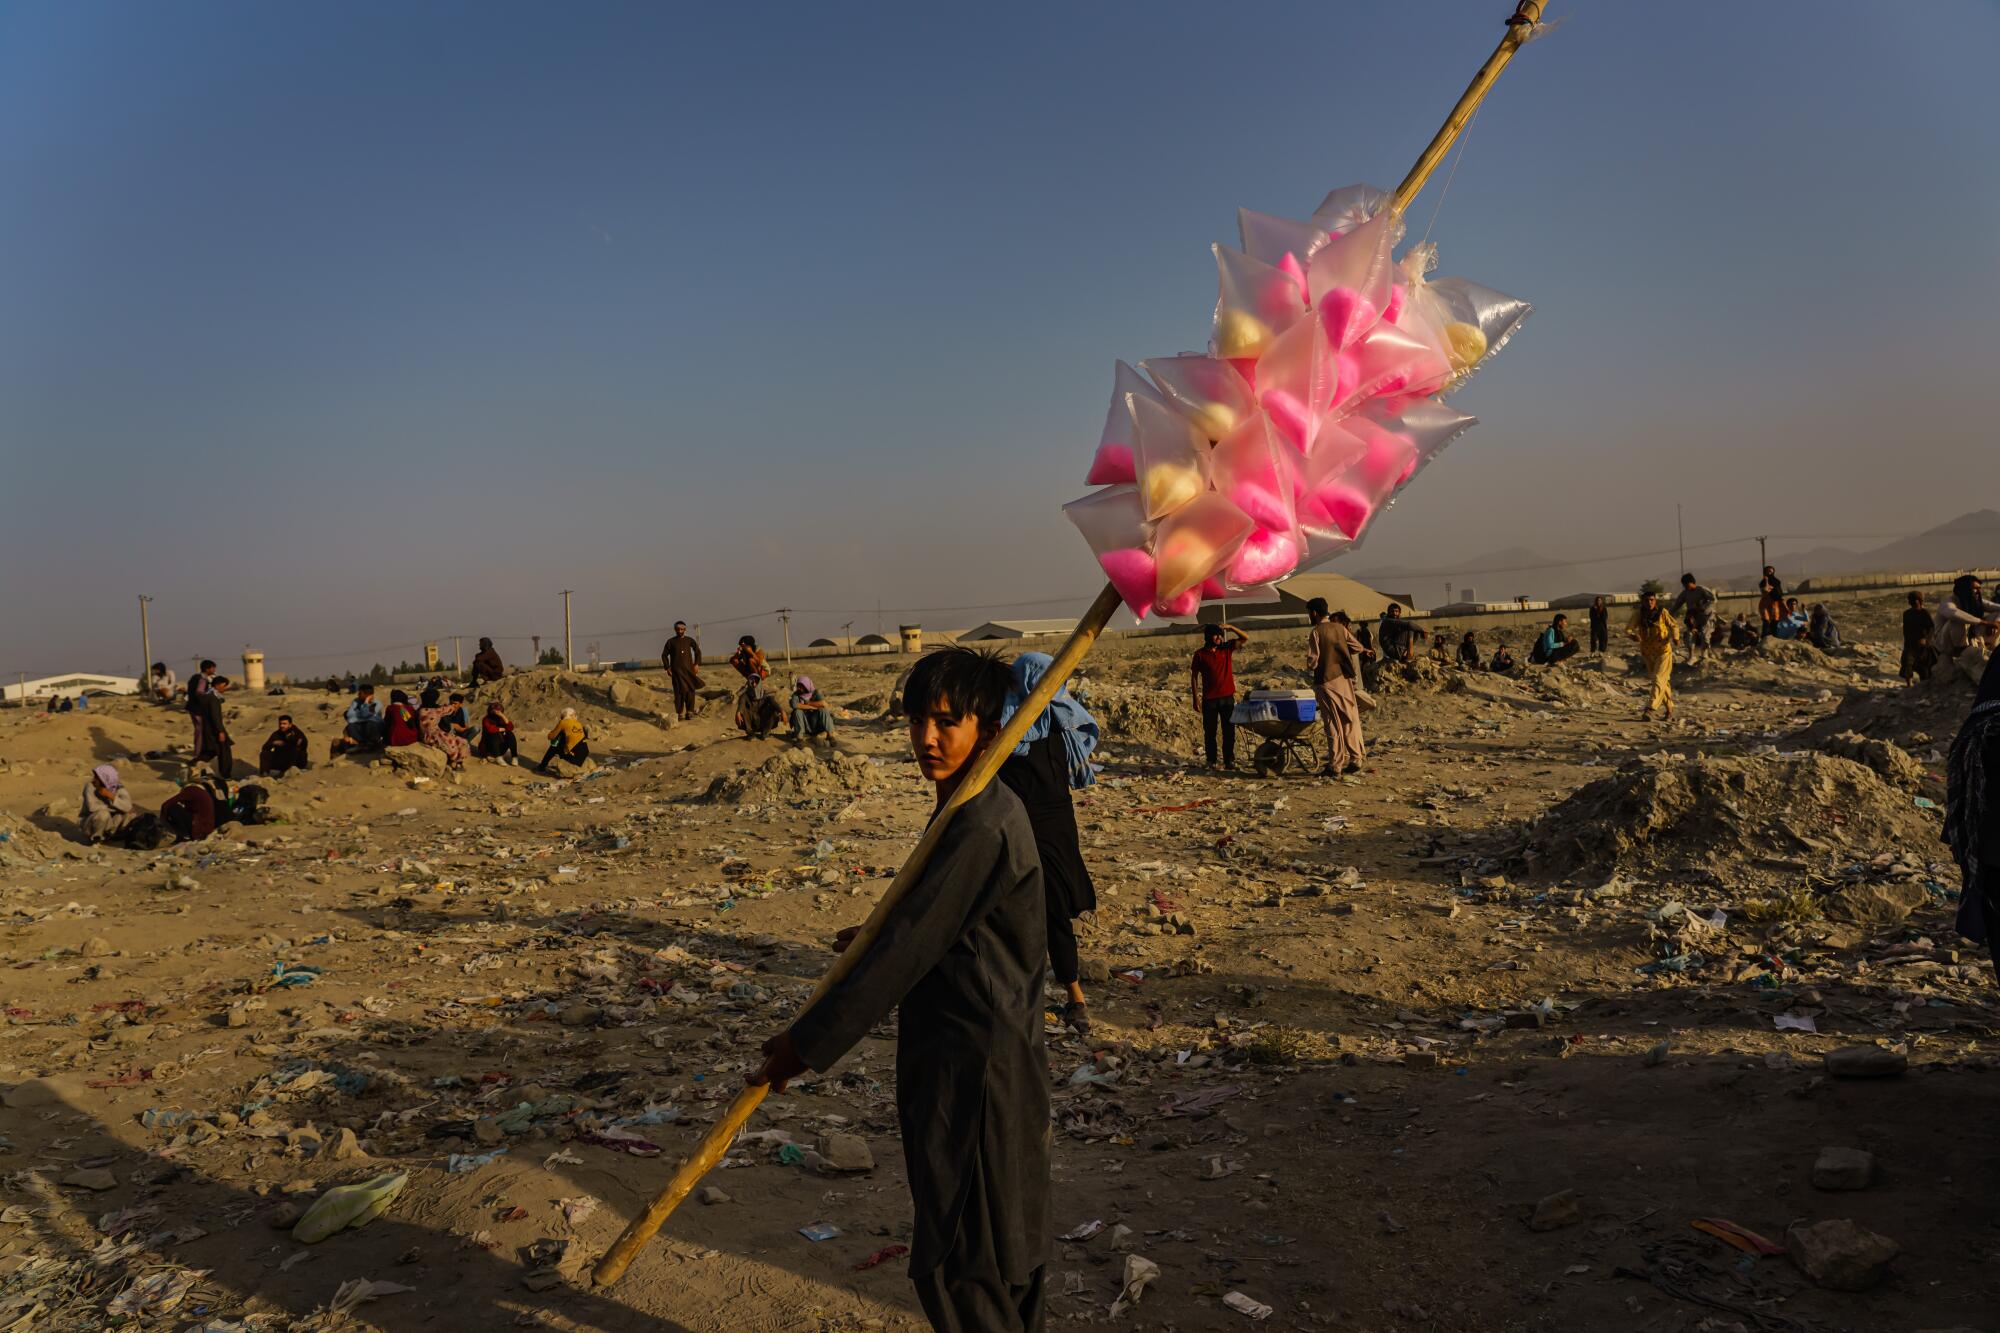 A boy holds a pole with cotton candy in an area with people standing and sitting on the ground.